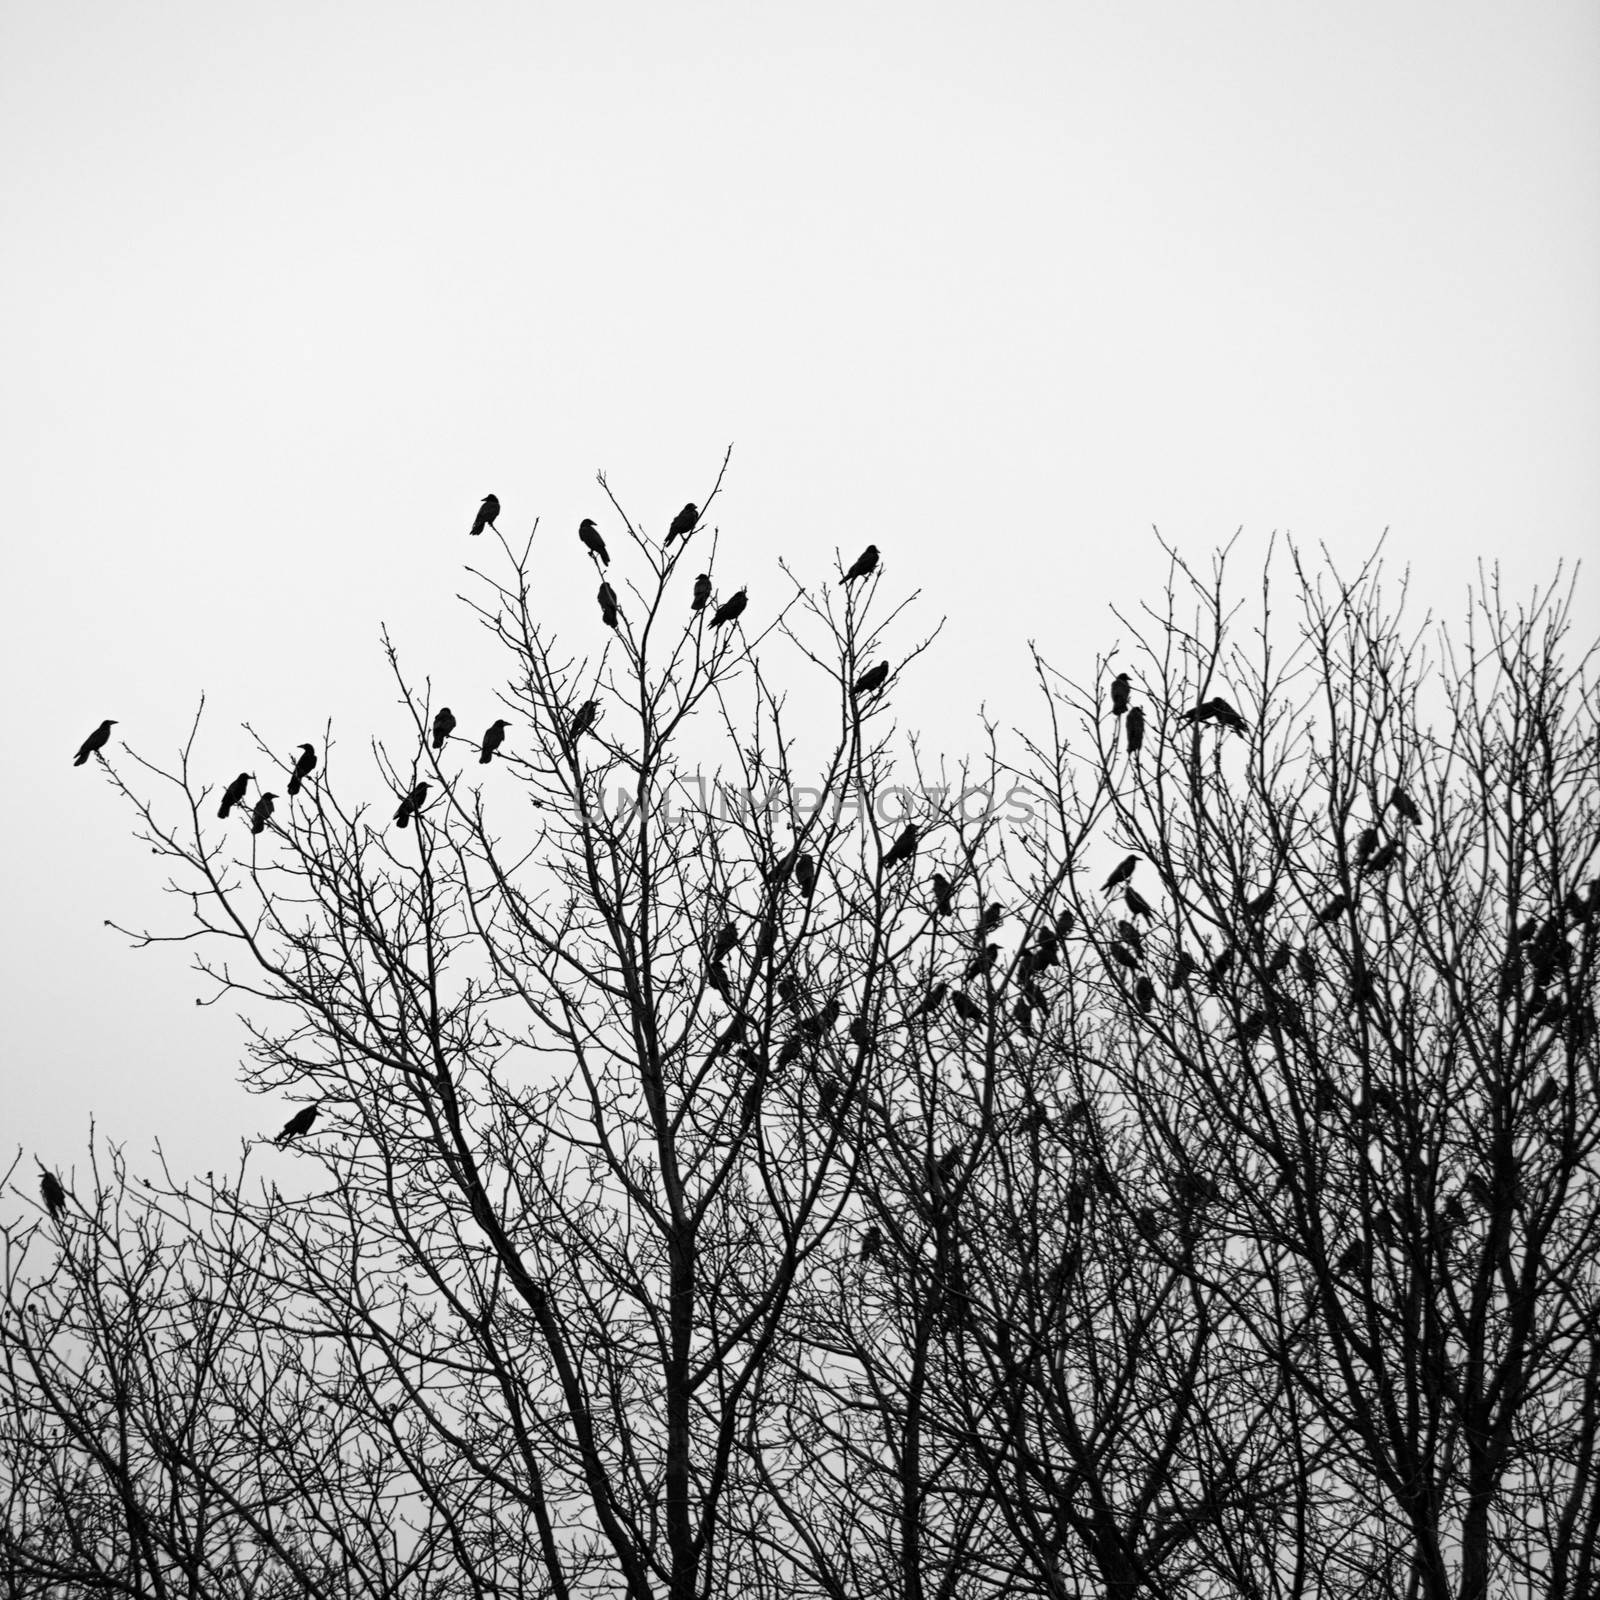 Ravens  on the trees by oksix